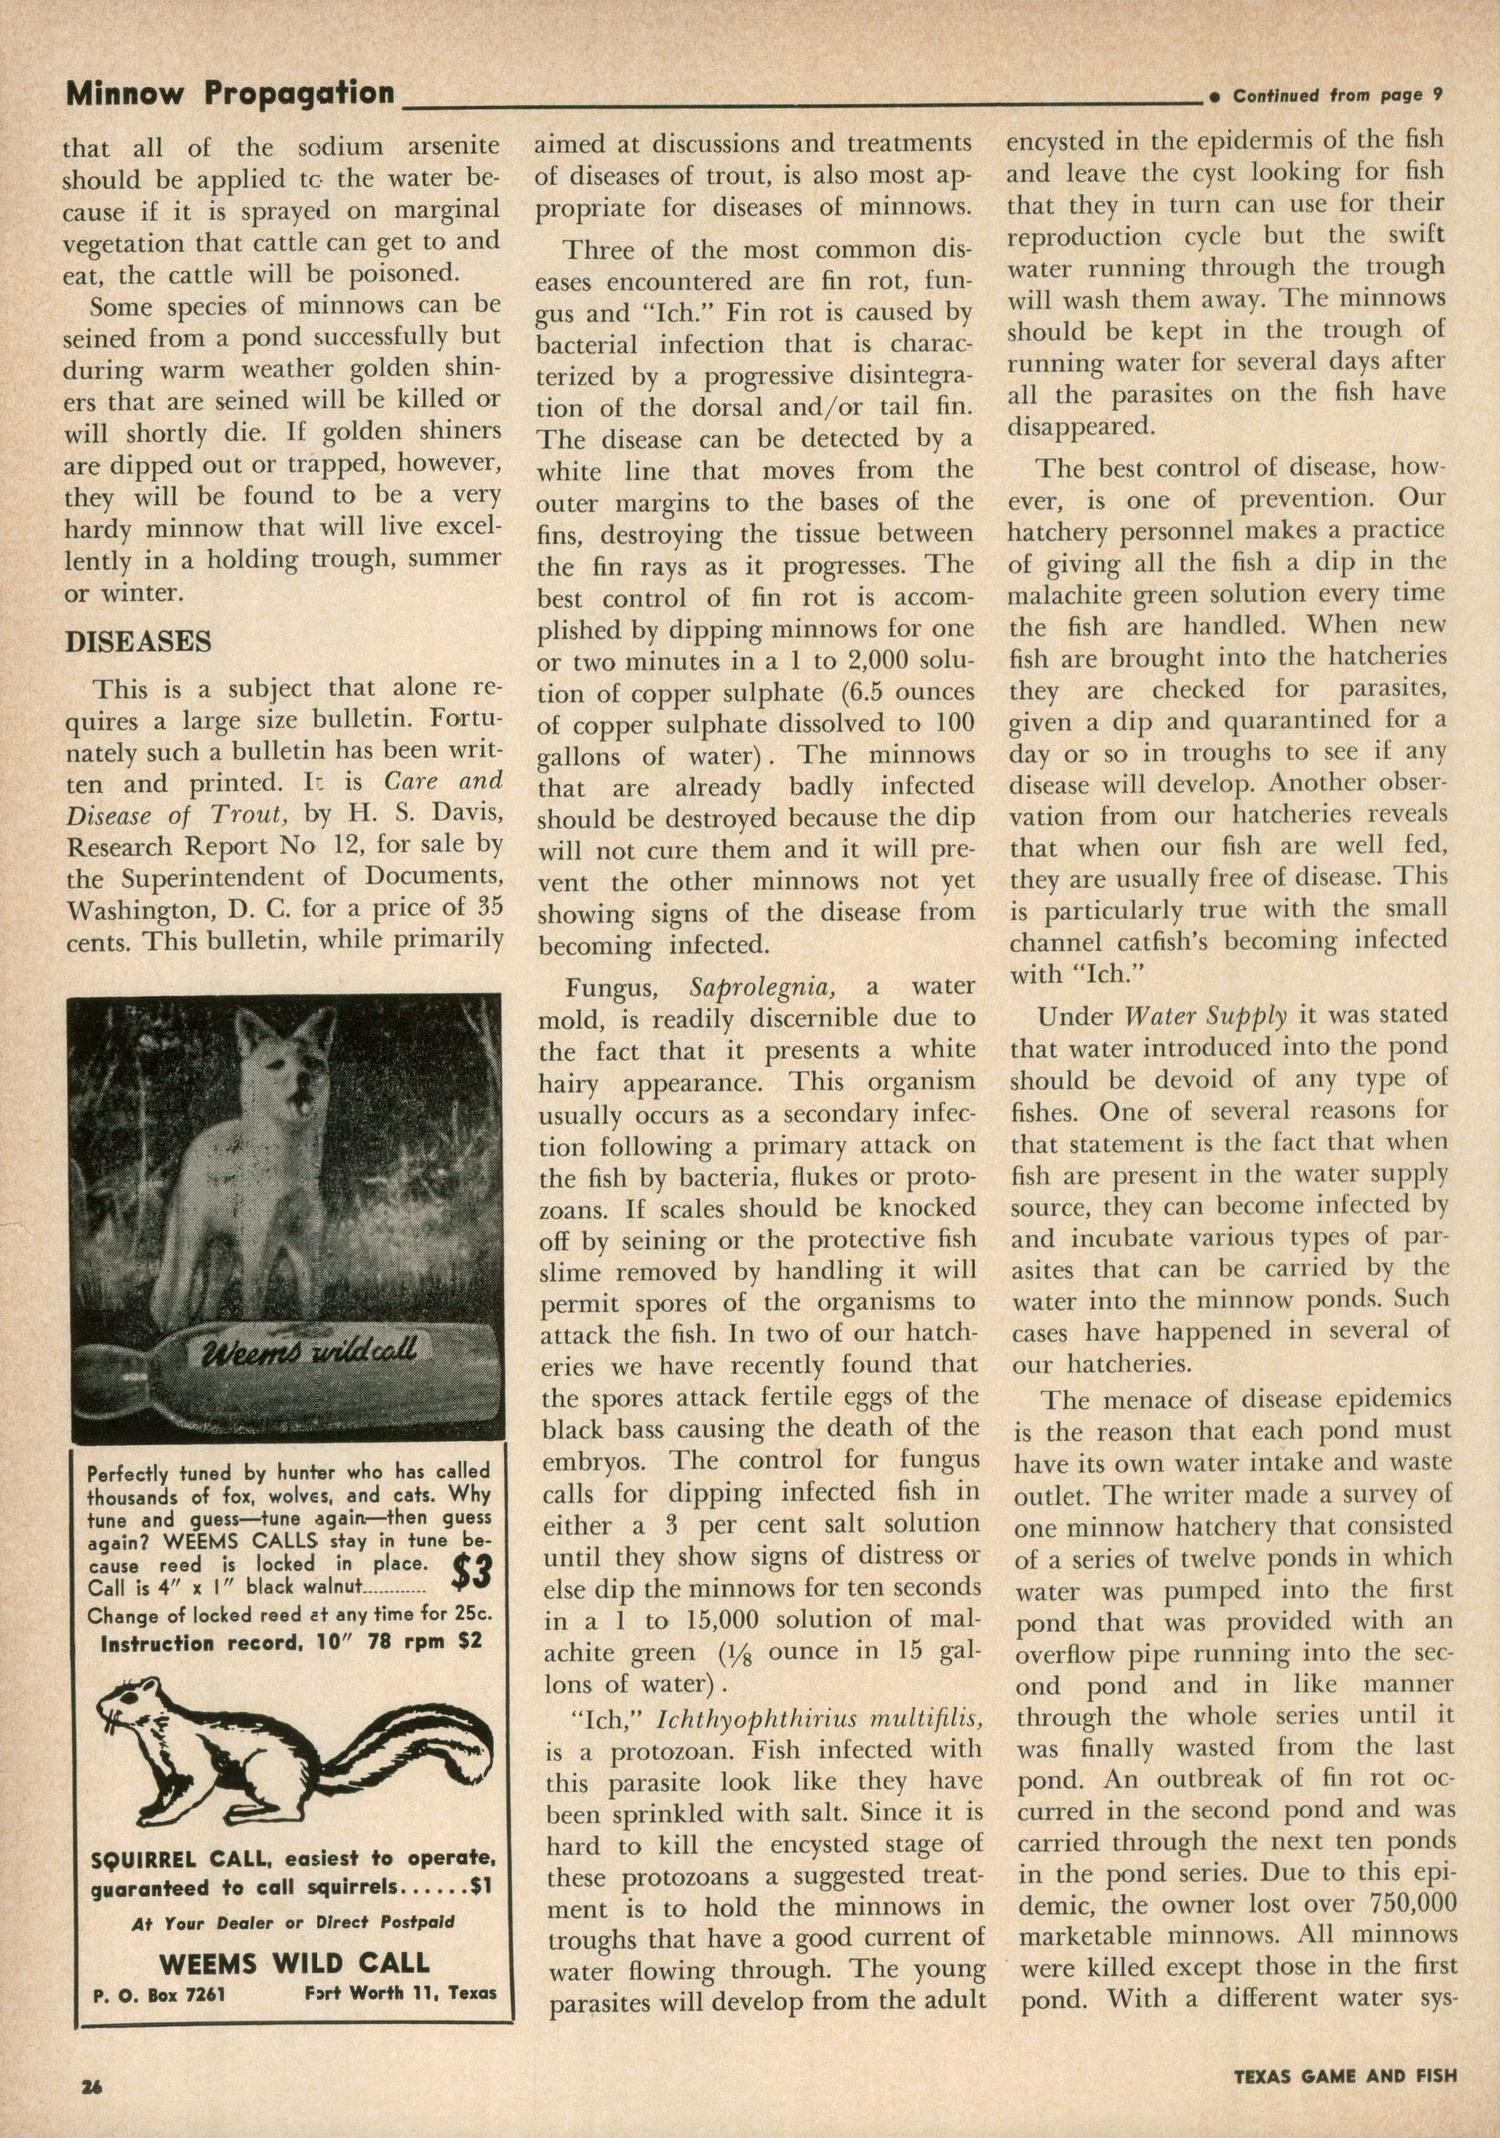 Texas Game and Fish, Volume 13, Number 4, April 1955
                                                
                                                    26
                                                